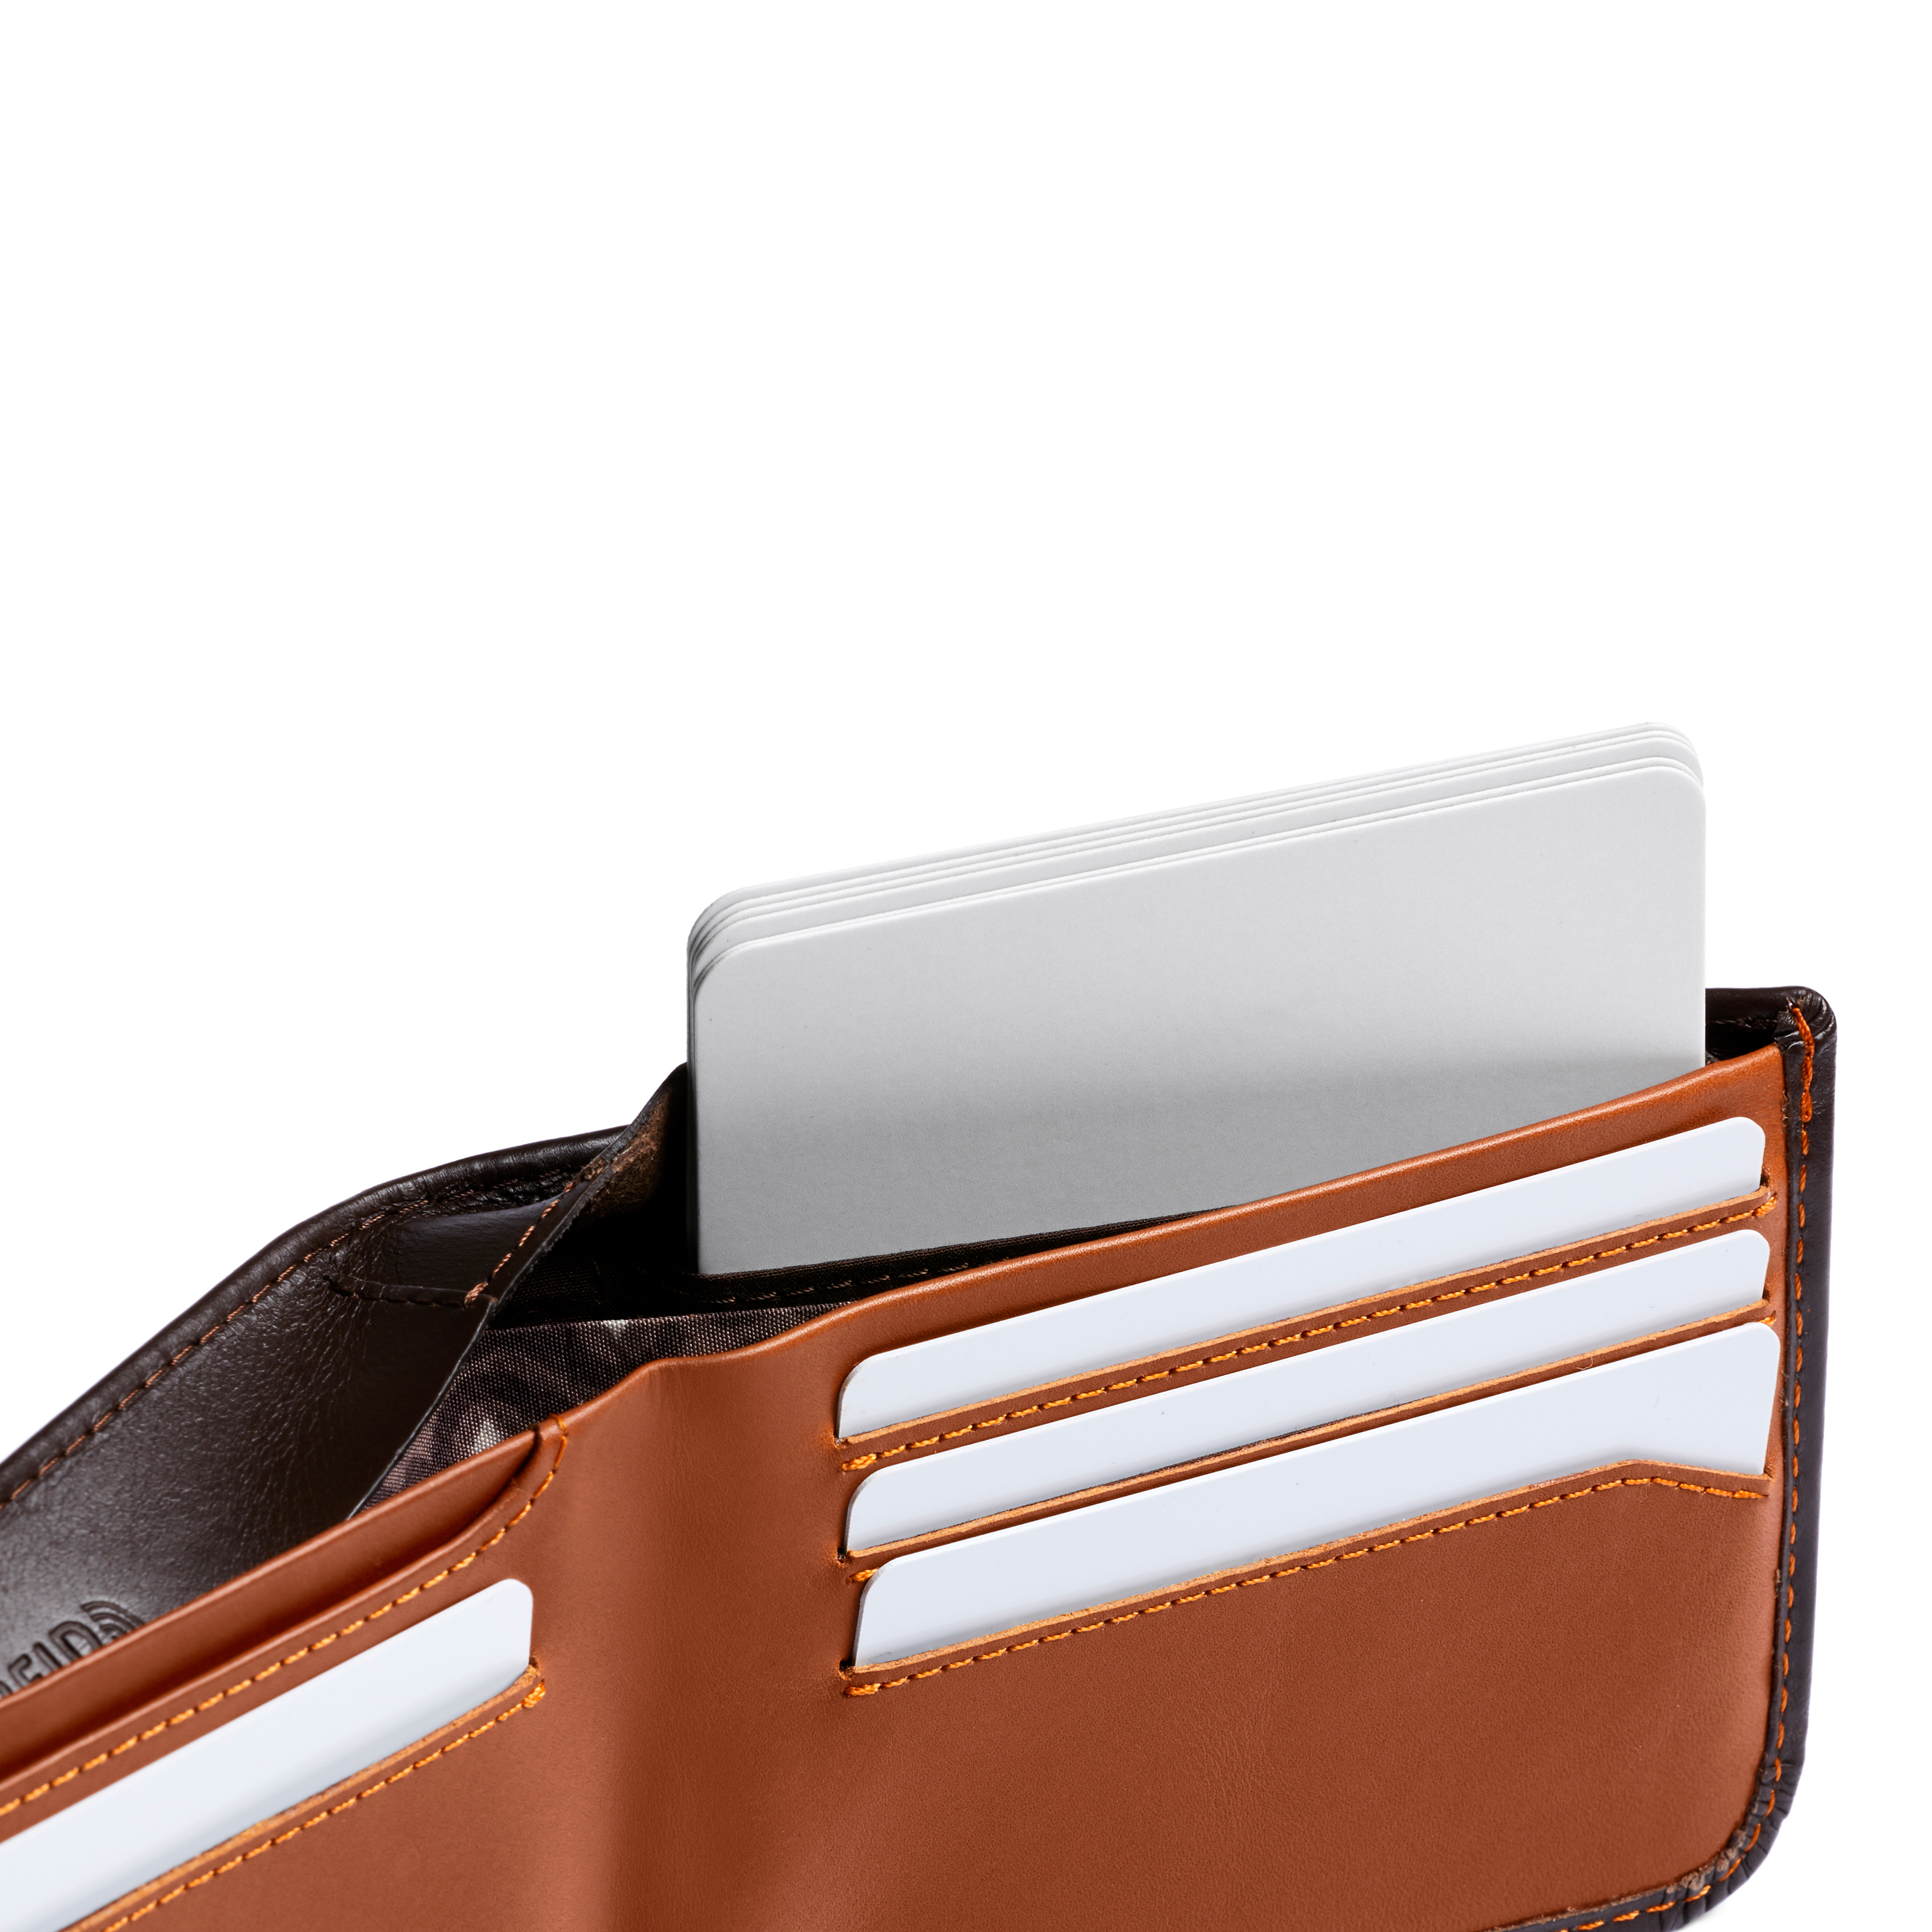 Best RFID-blocking wallets and bags in 2023 - CBS News